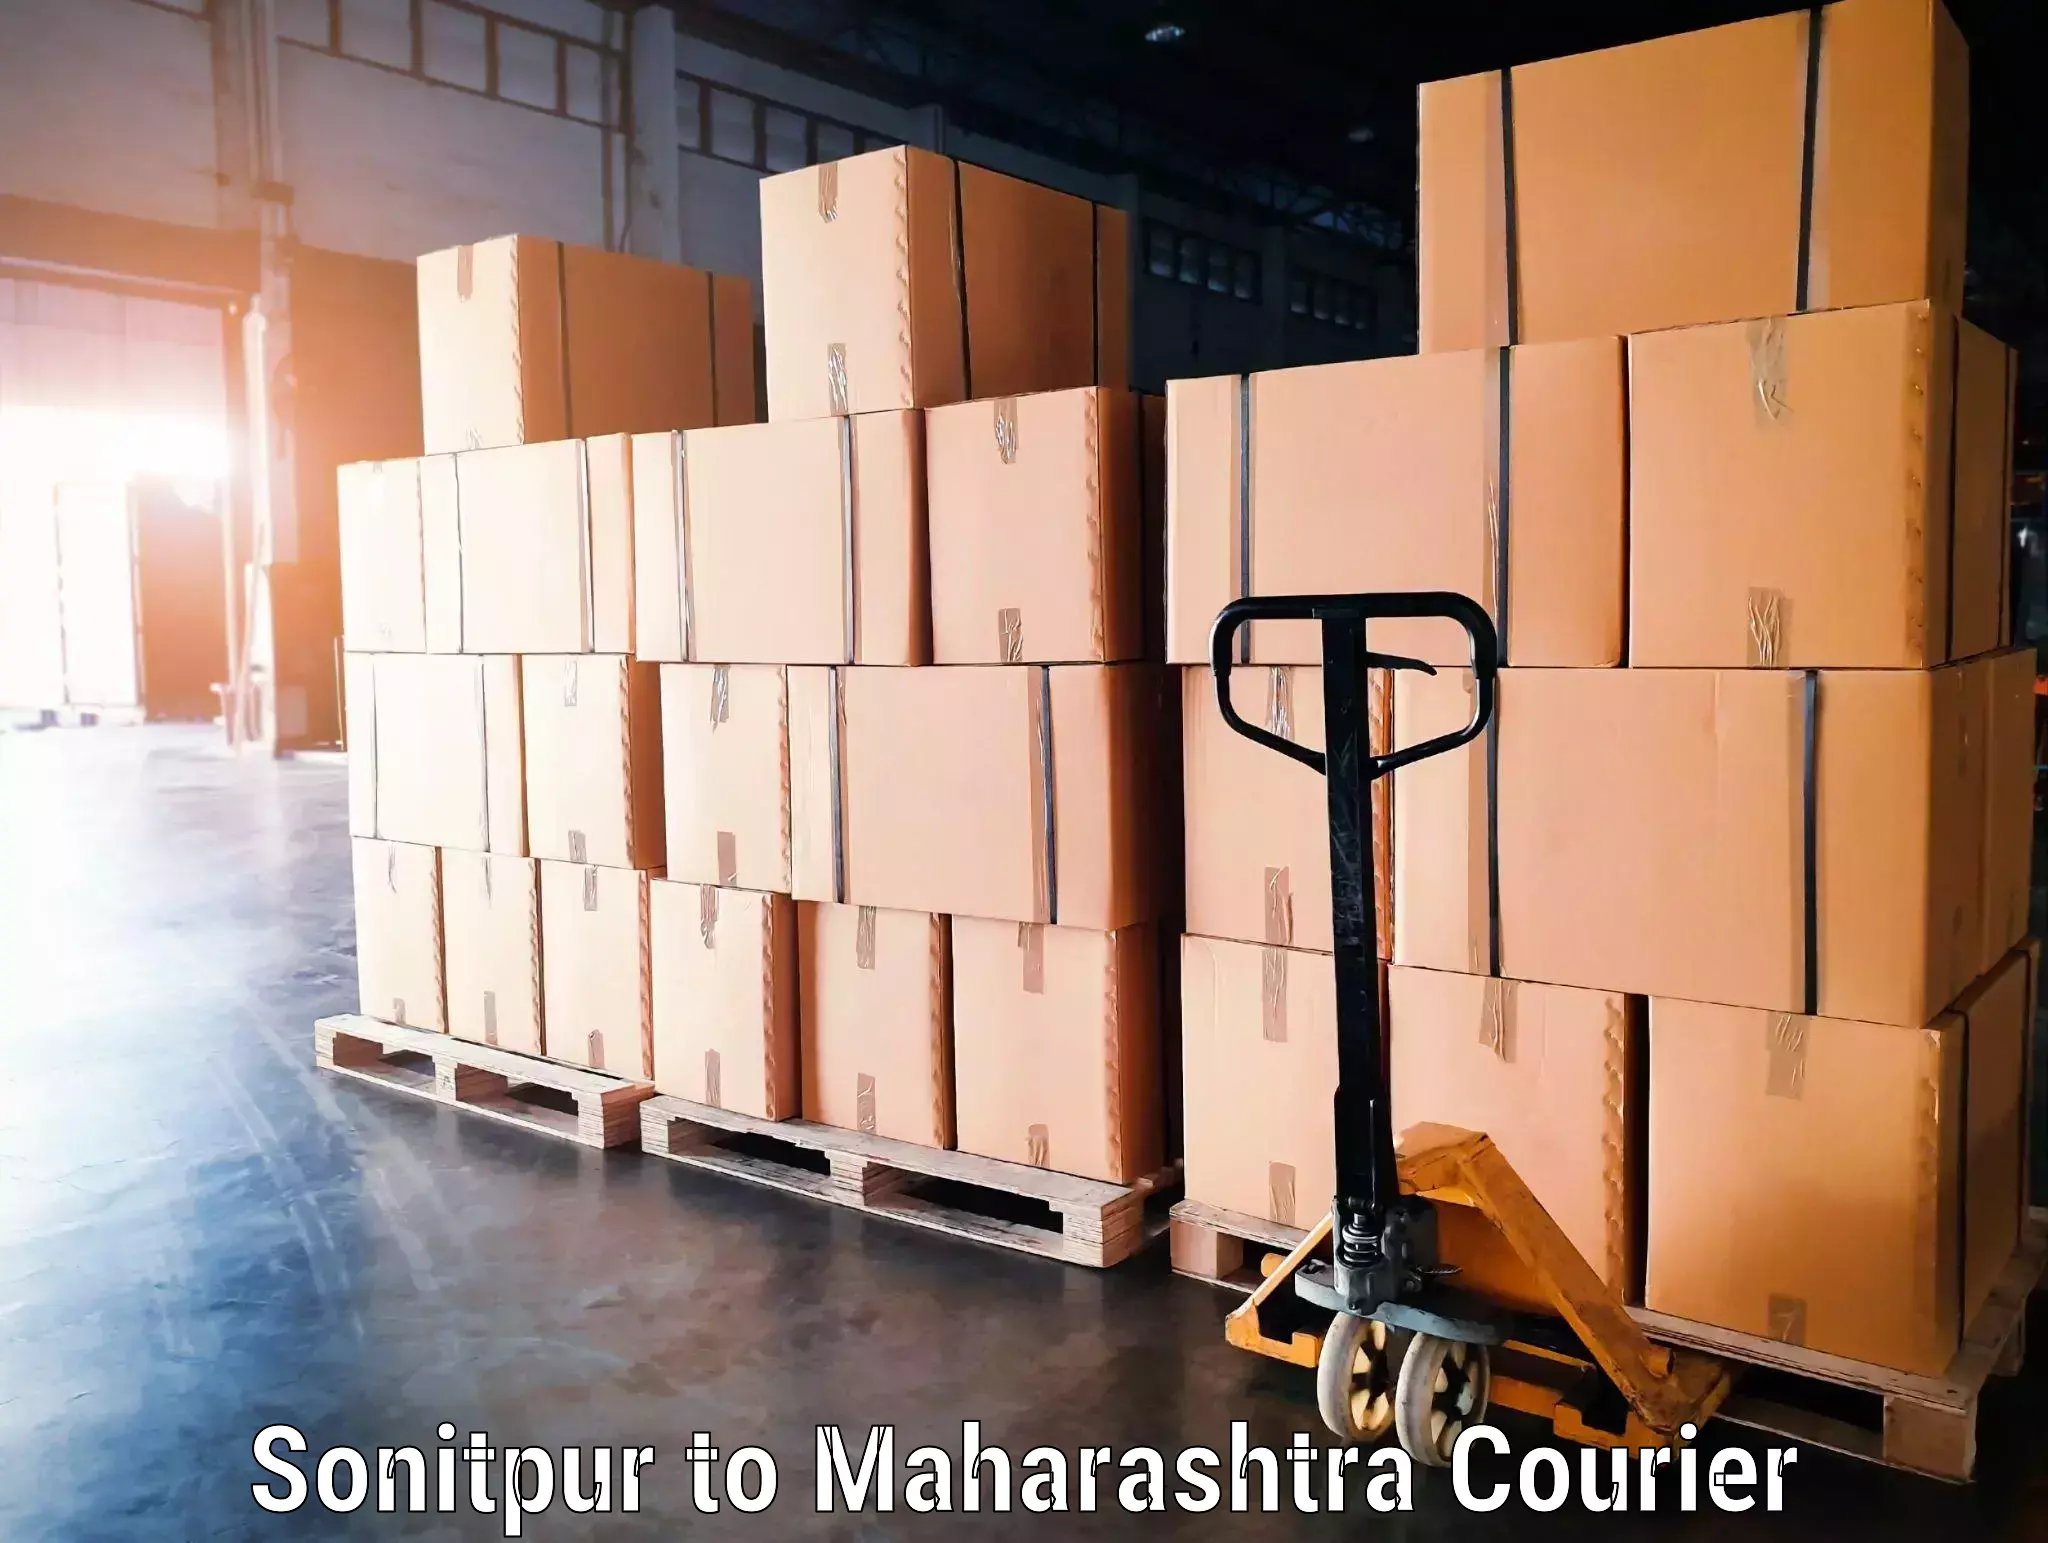 Luggage delivery app Sonitpur to Kalyan Dombivli